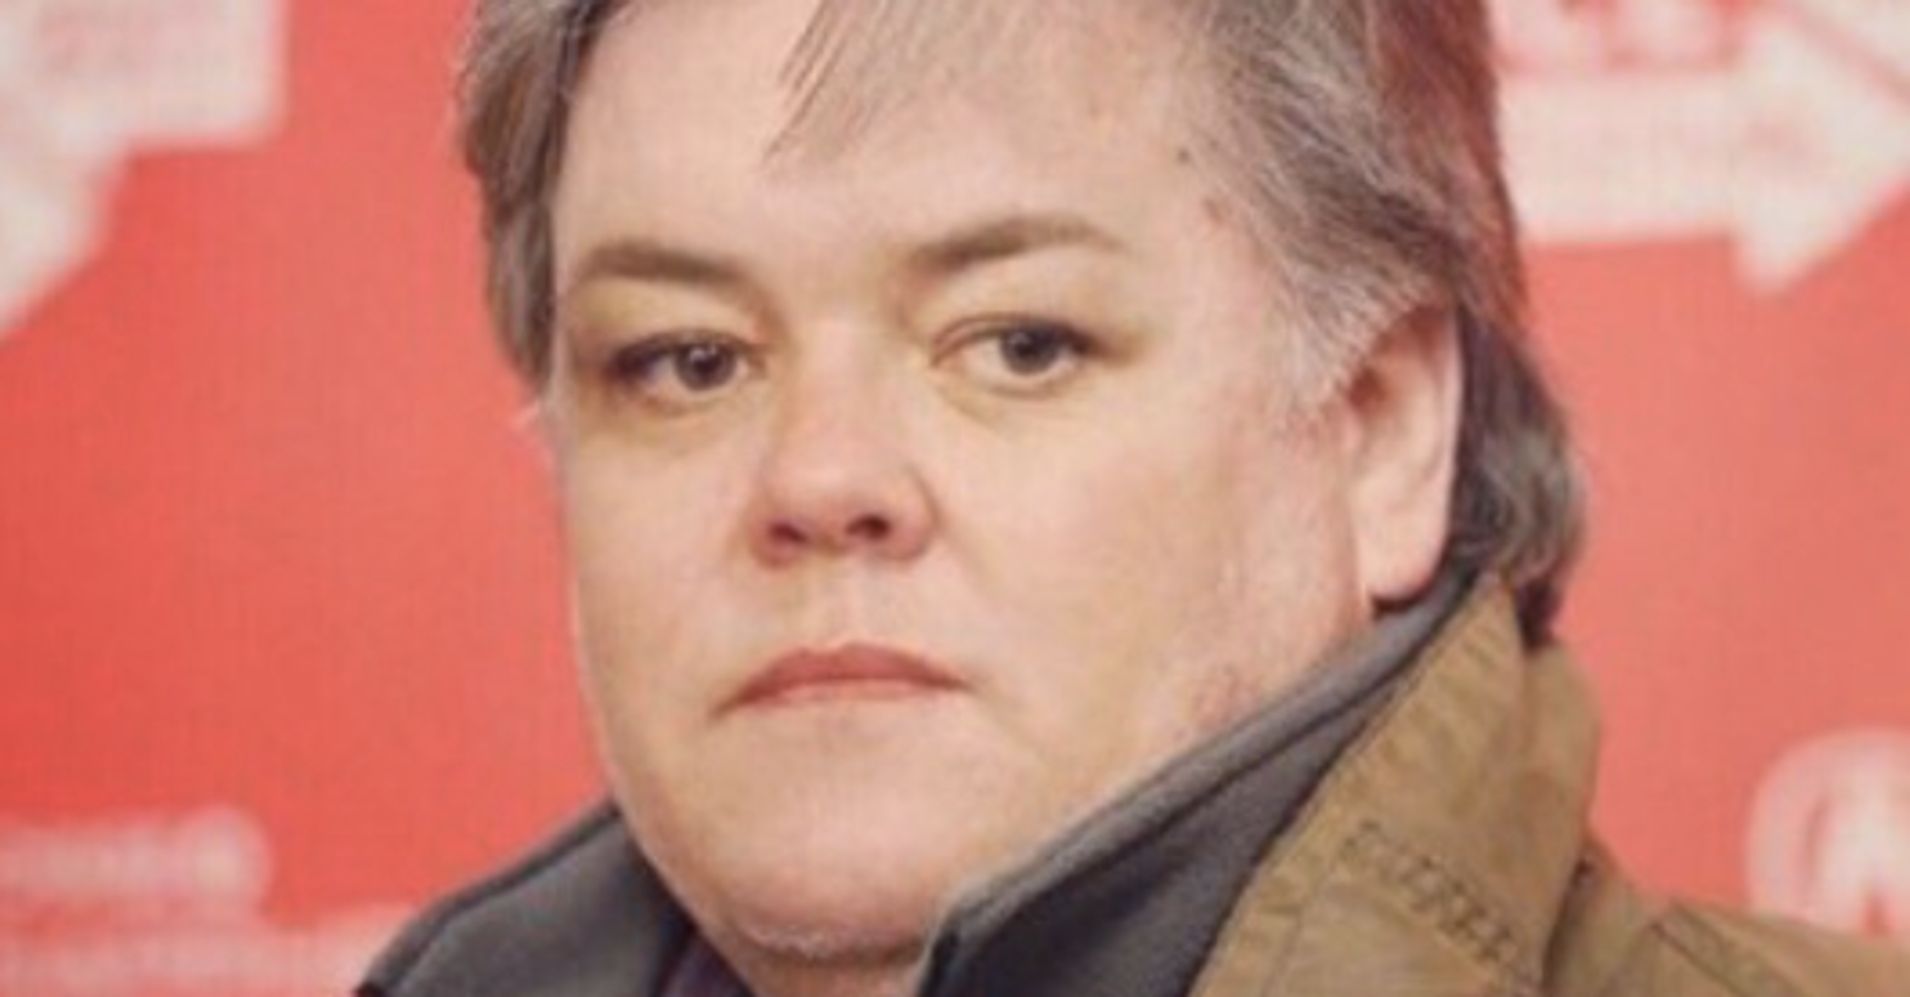 So Rosie Odonnell Isnt Playing Steve Bannon On Saturday Night Live